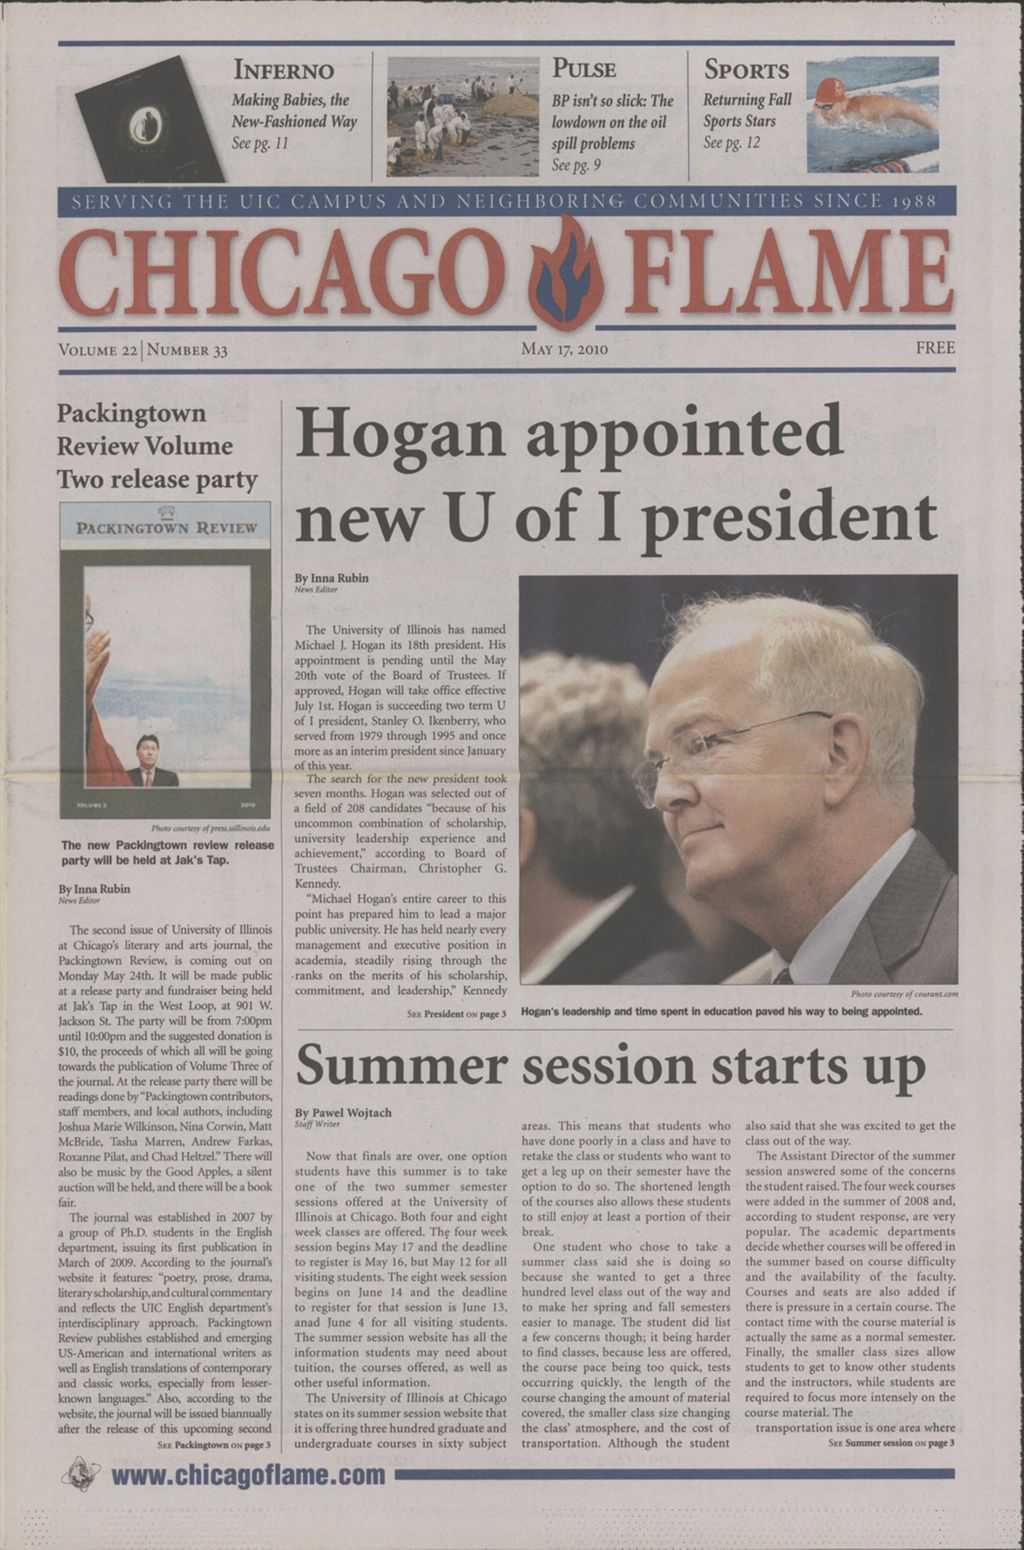 Miniature of Chicago Flame (May 17, 2010)